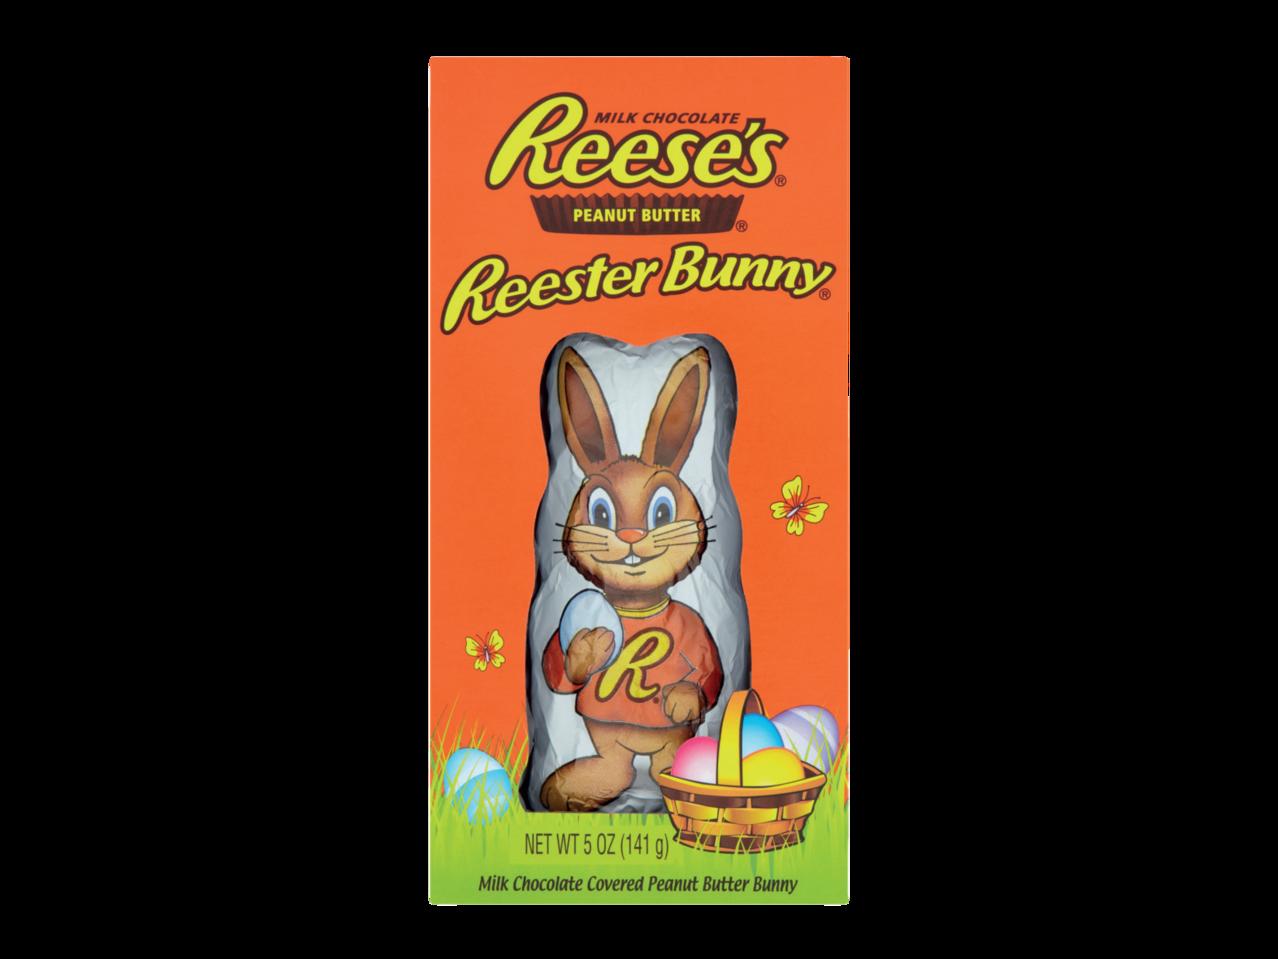 Reese's Peanut Butter Reester Bunny